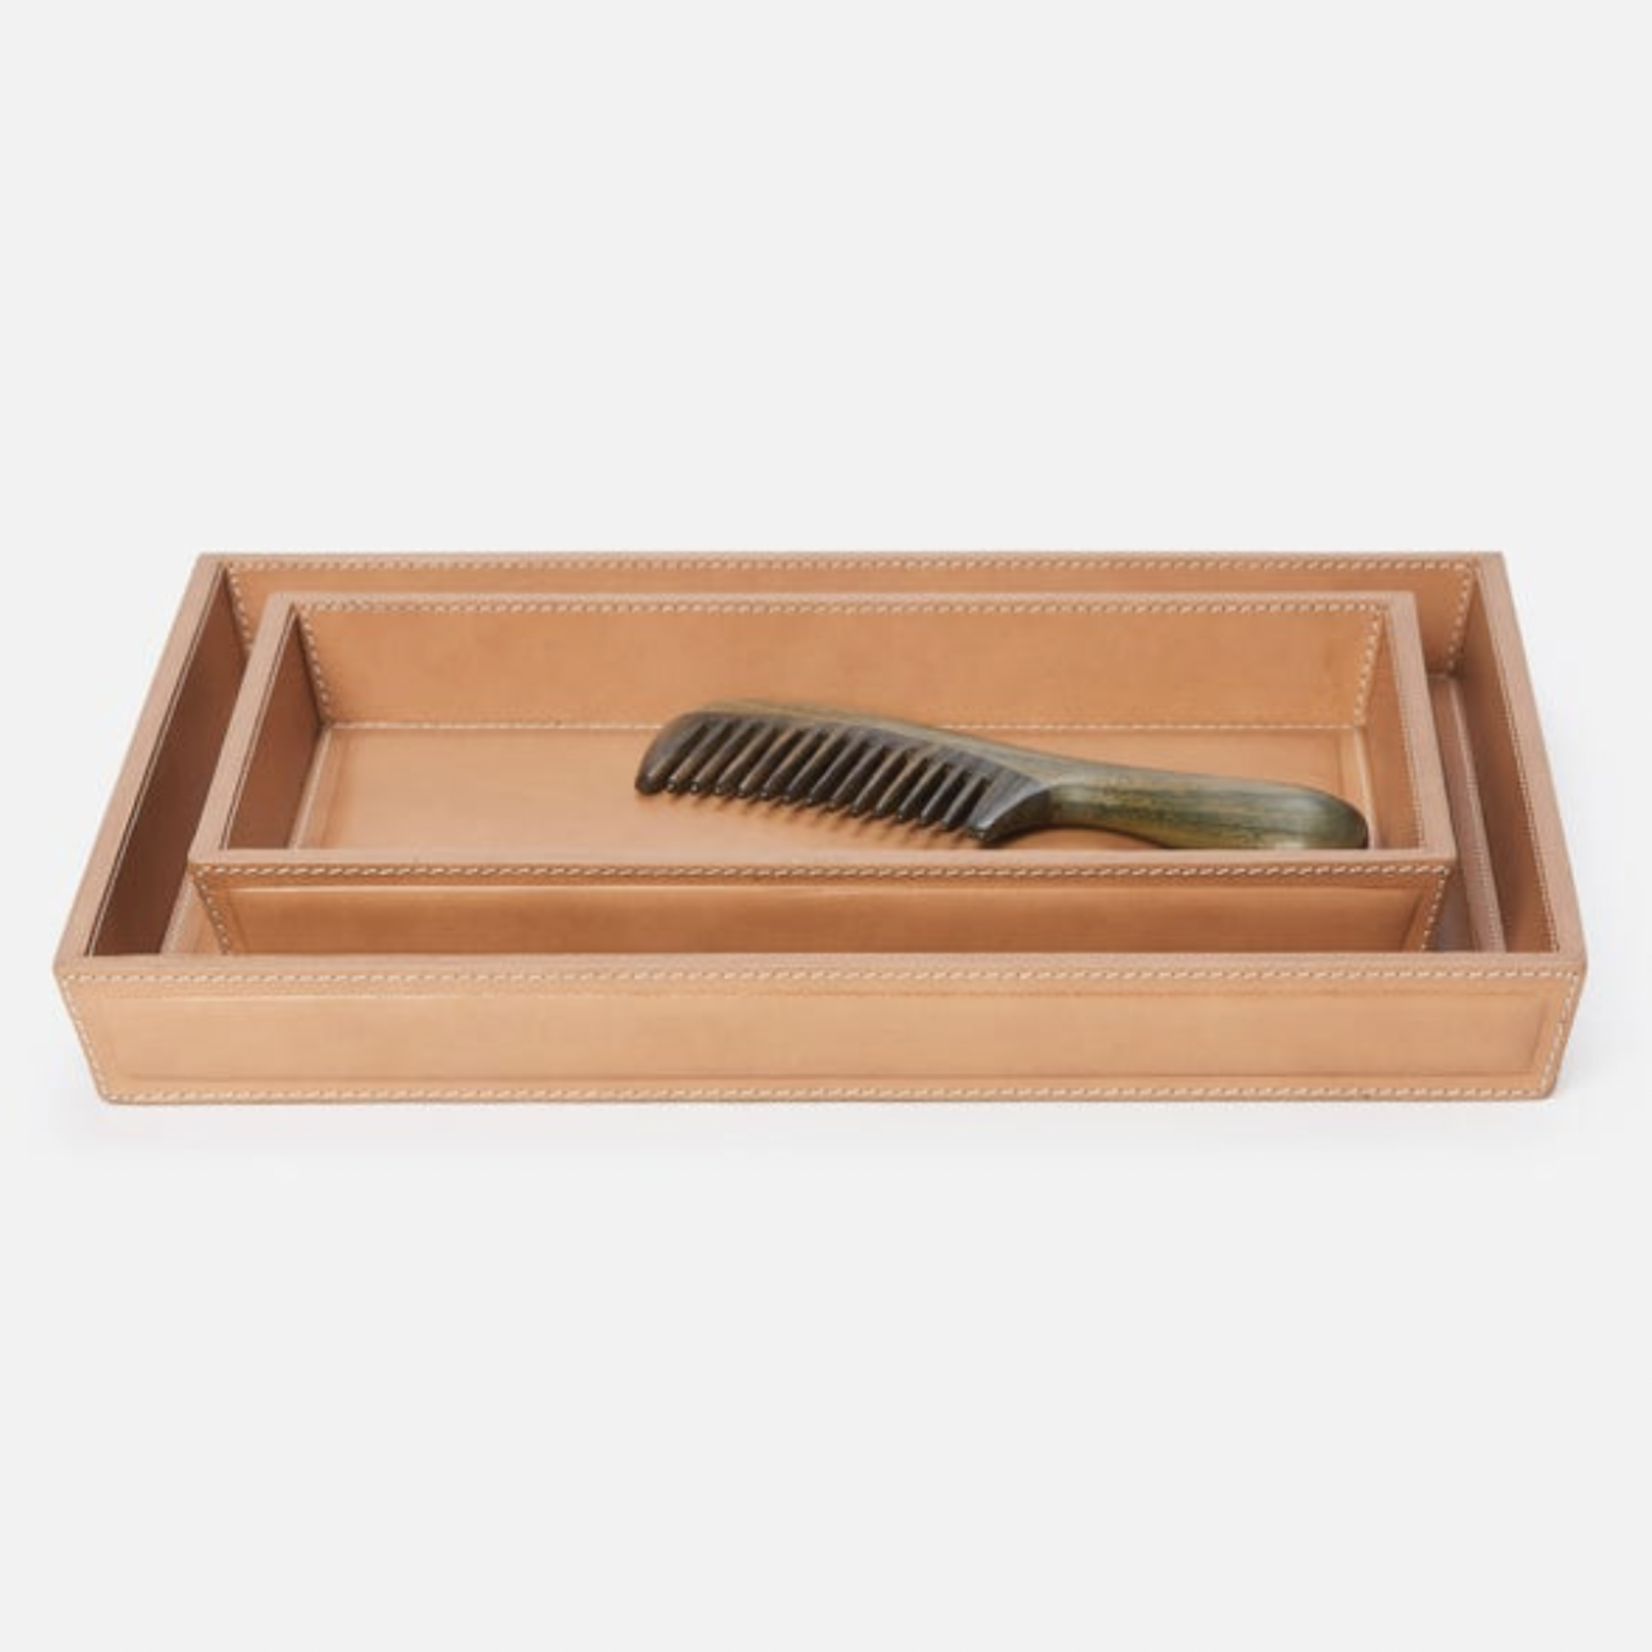 Lorient, G3 Square Tray, Aged Camel Full-Grain Leather